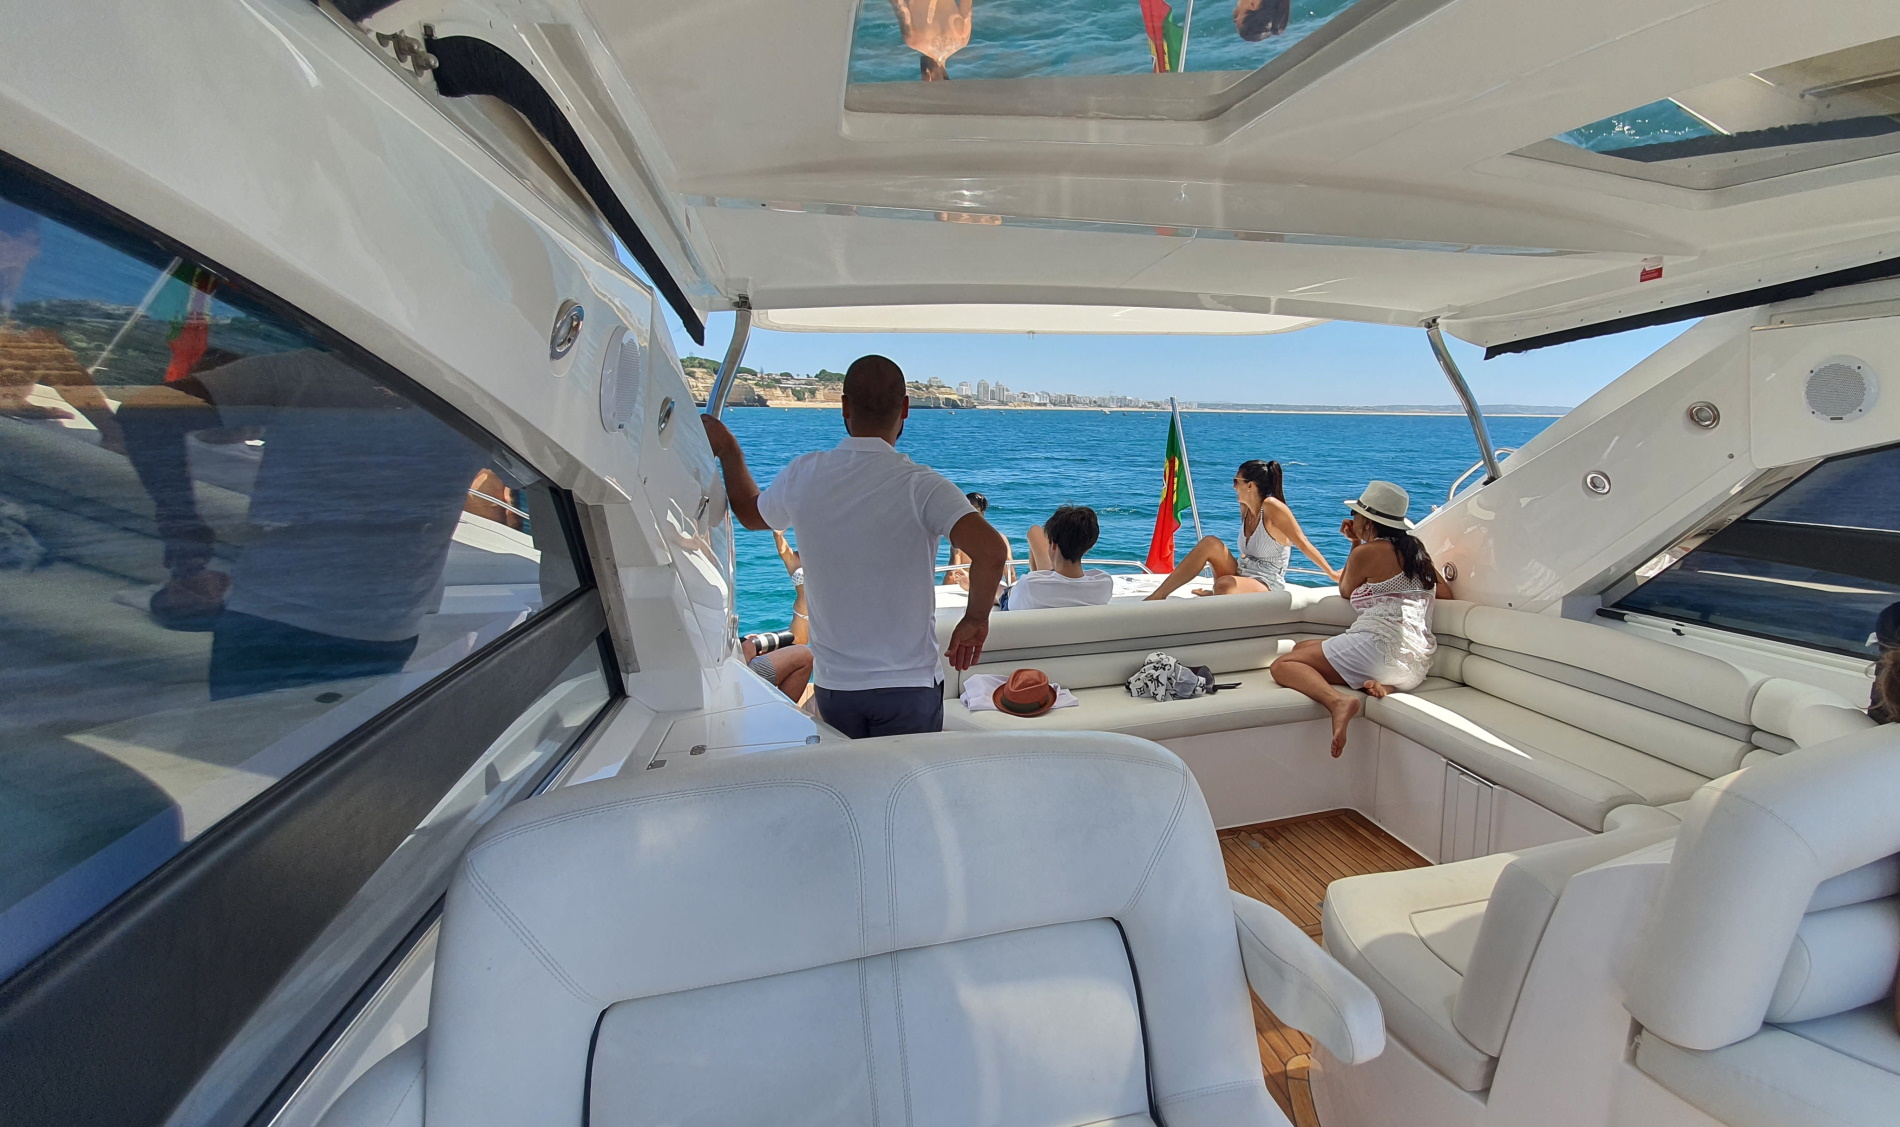 Have a great time on your yacht in Albufeira